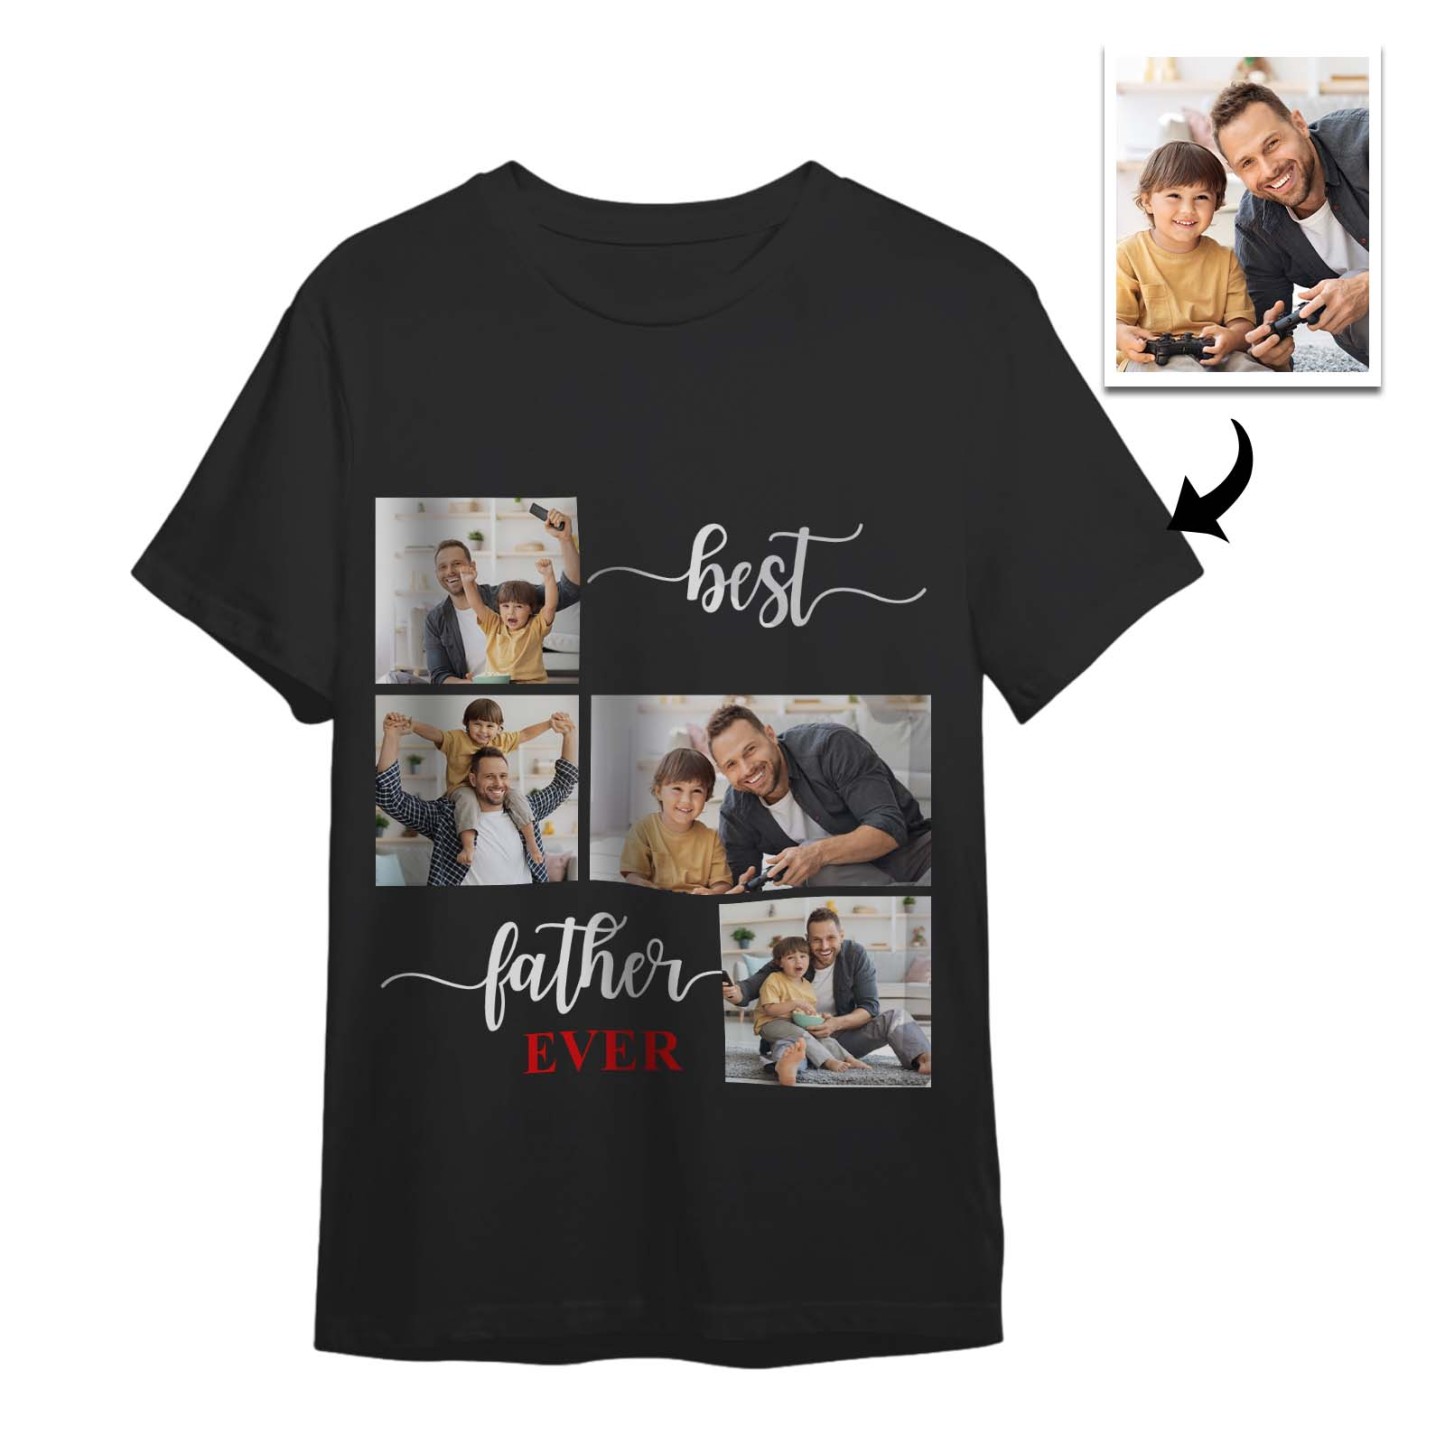 Custom 4 Photos T-Shirt Personalized Photo T-Shirt Best Father Ever Father's Day Gift Family T-Shirt - MyPhotoSocksAu